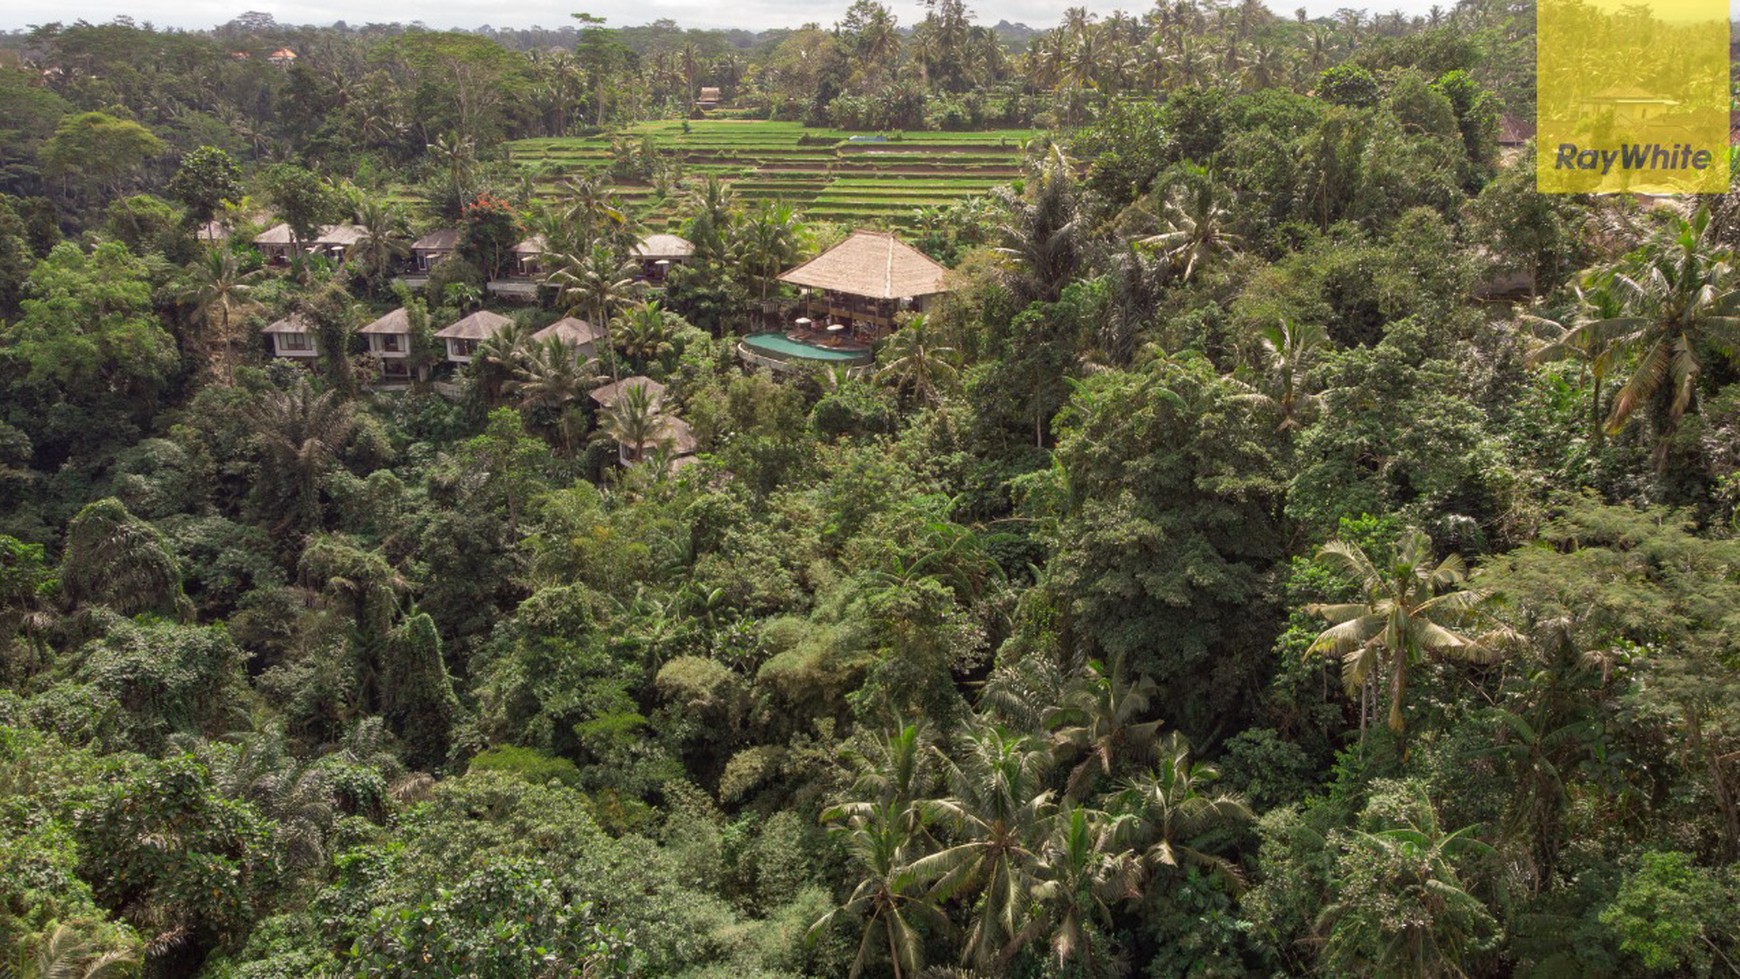 12,619 sq m of Freehold Land with Stunning River and Valley Views Located 7 Minutes from Ubud Palace